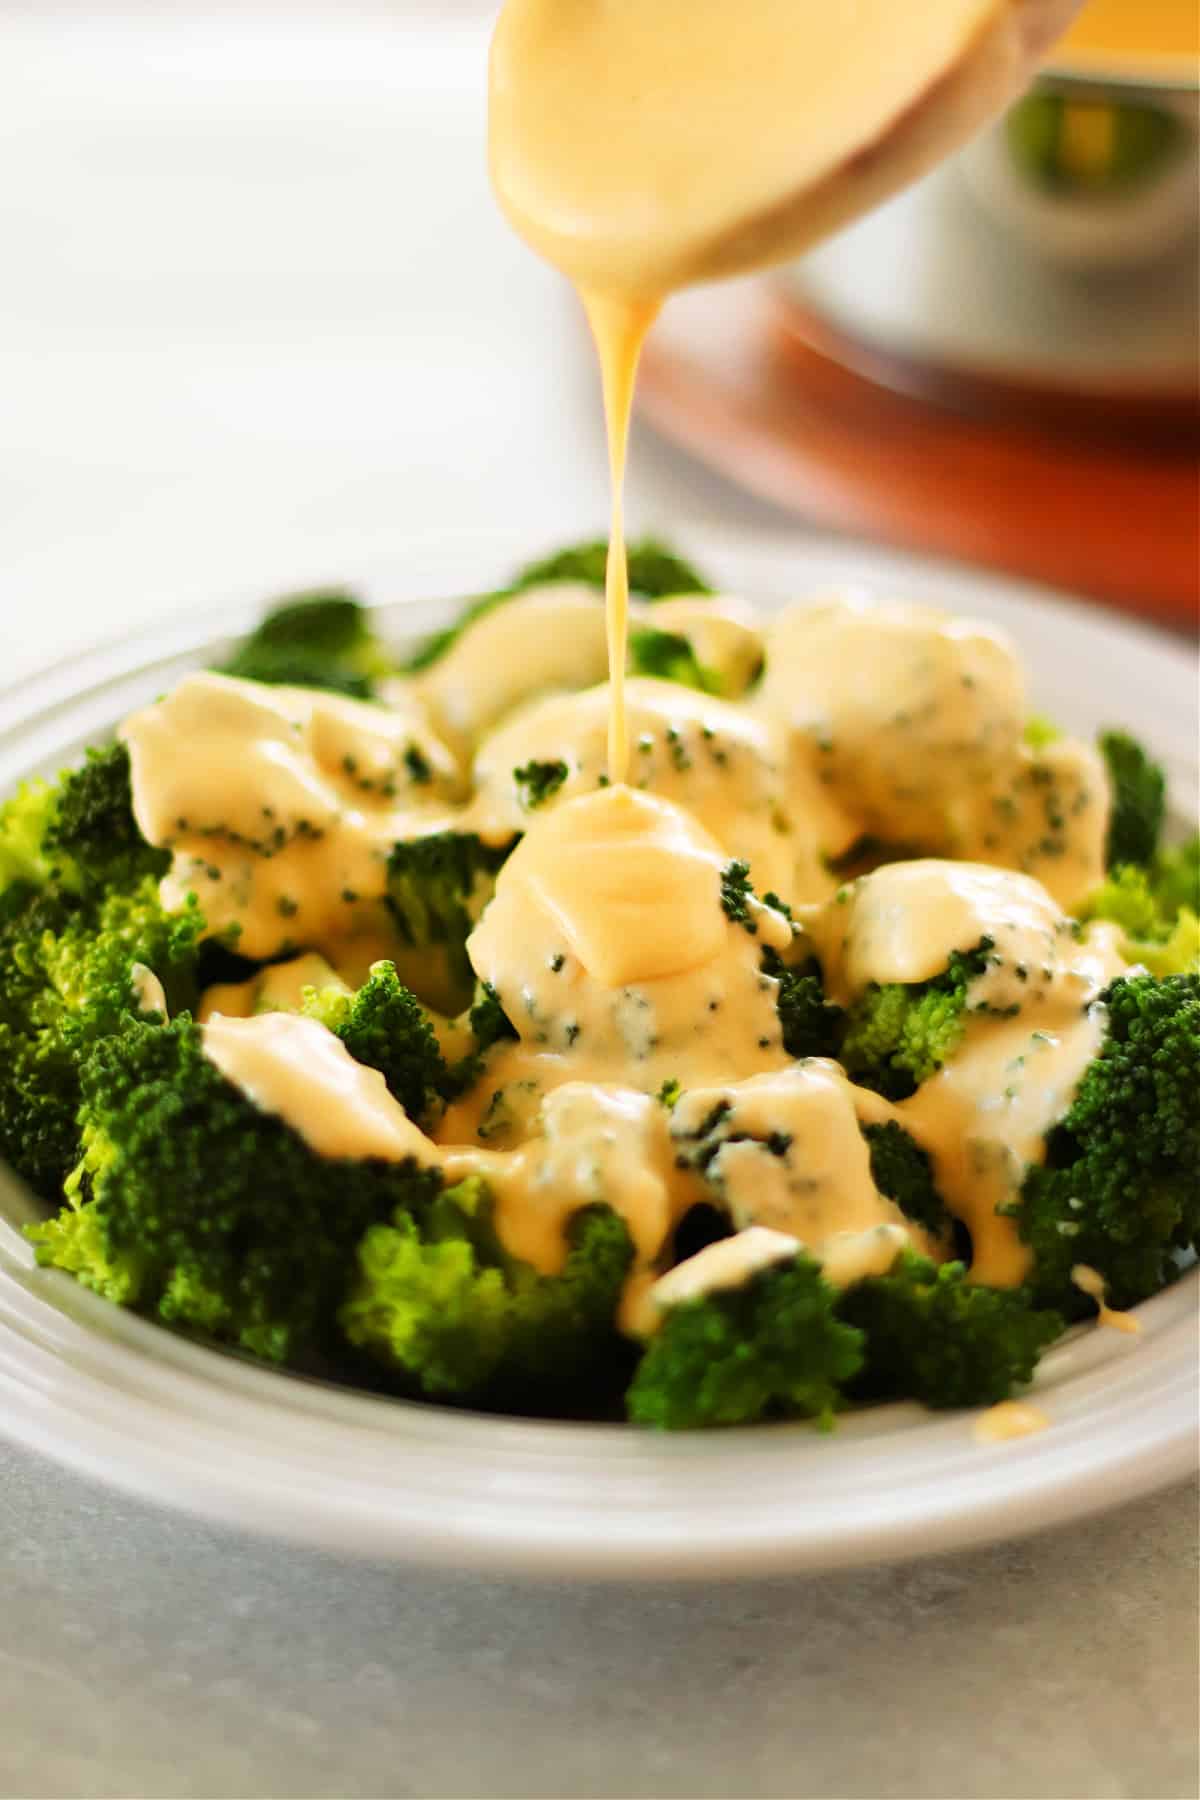 cheese sauce 1 Cheese Sauce for Broccoli (and other dishes!)